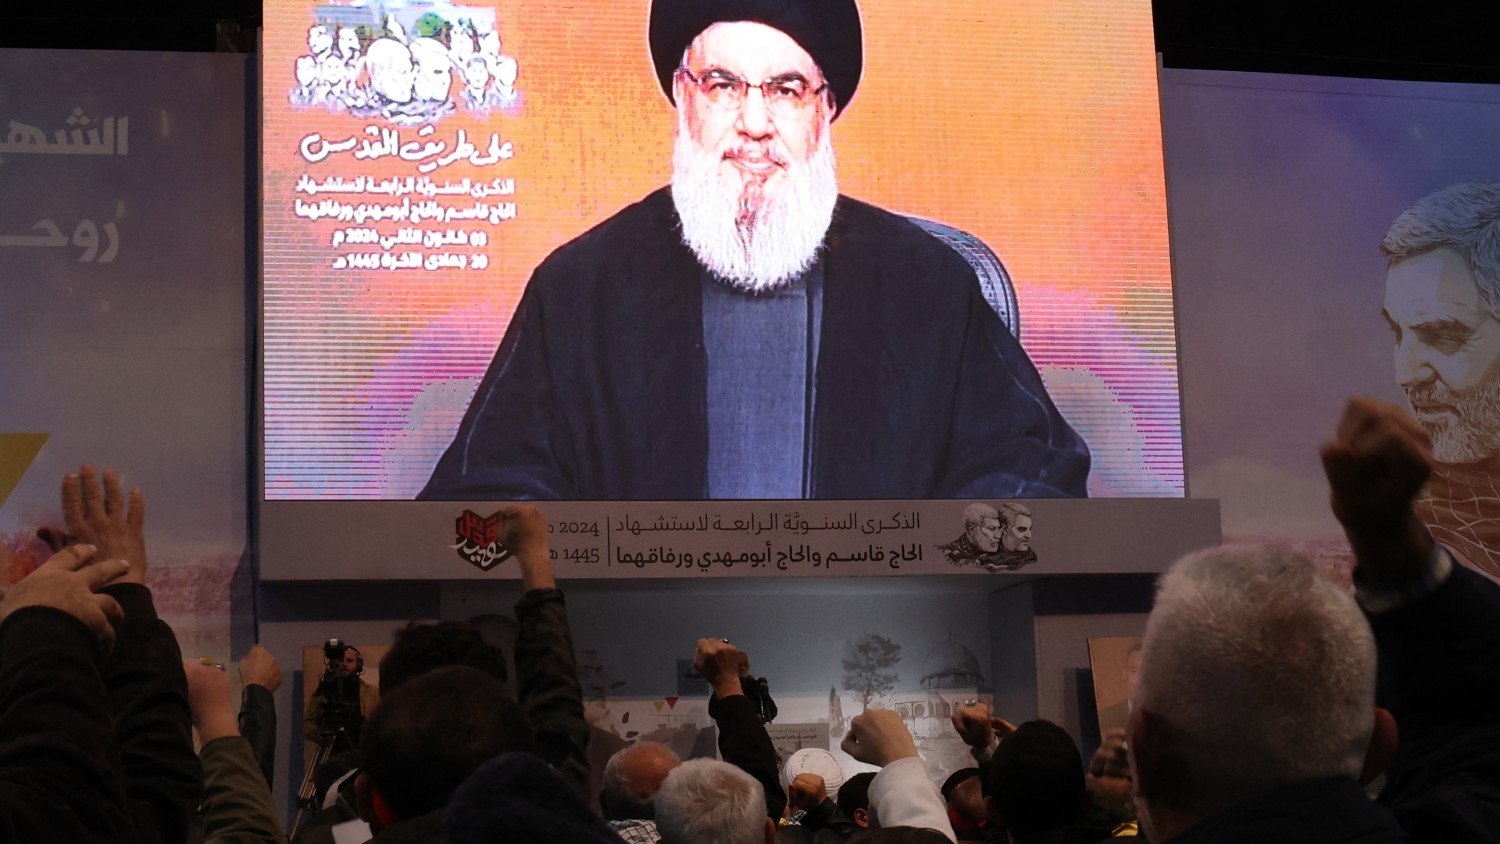 People watch the televised speech of Lebanon's Hezbollah chief Hassan Nasrallah to mark the anniversary of the killing of slain top Iranian commander Qassem Soleimani, in Beirut on 3 January 2024.